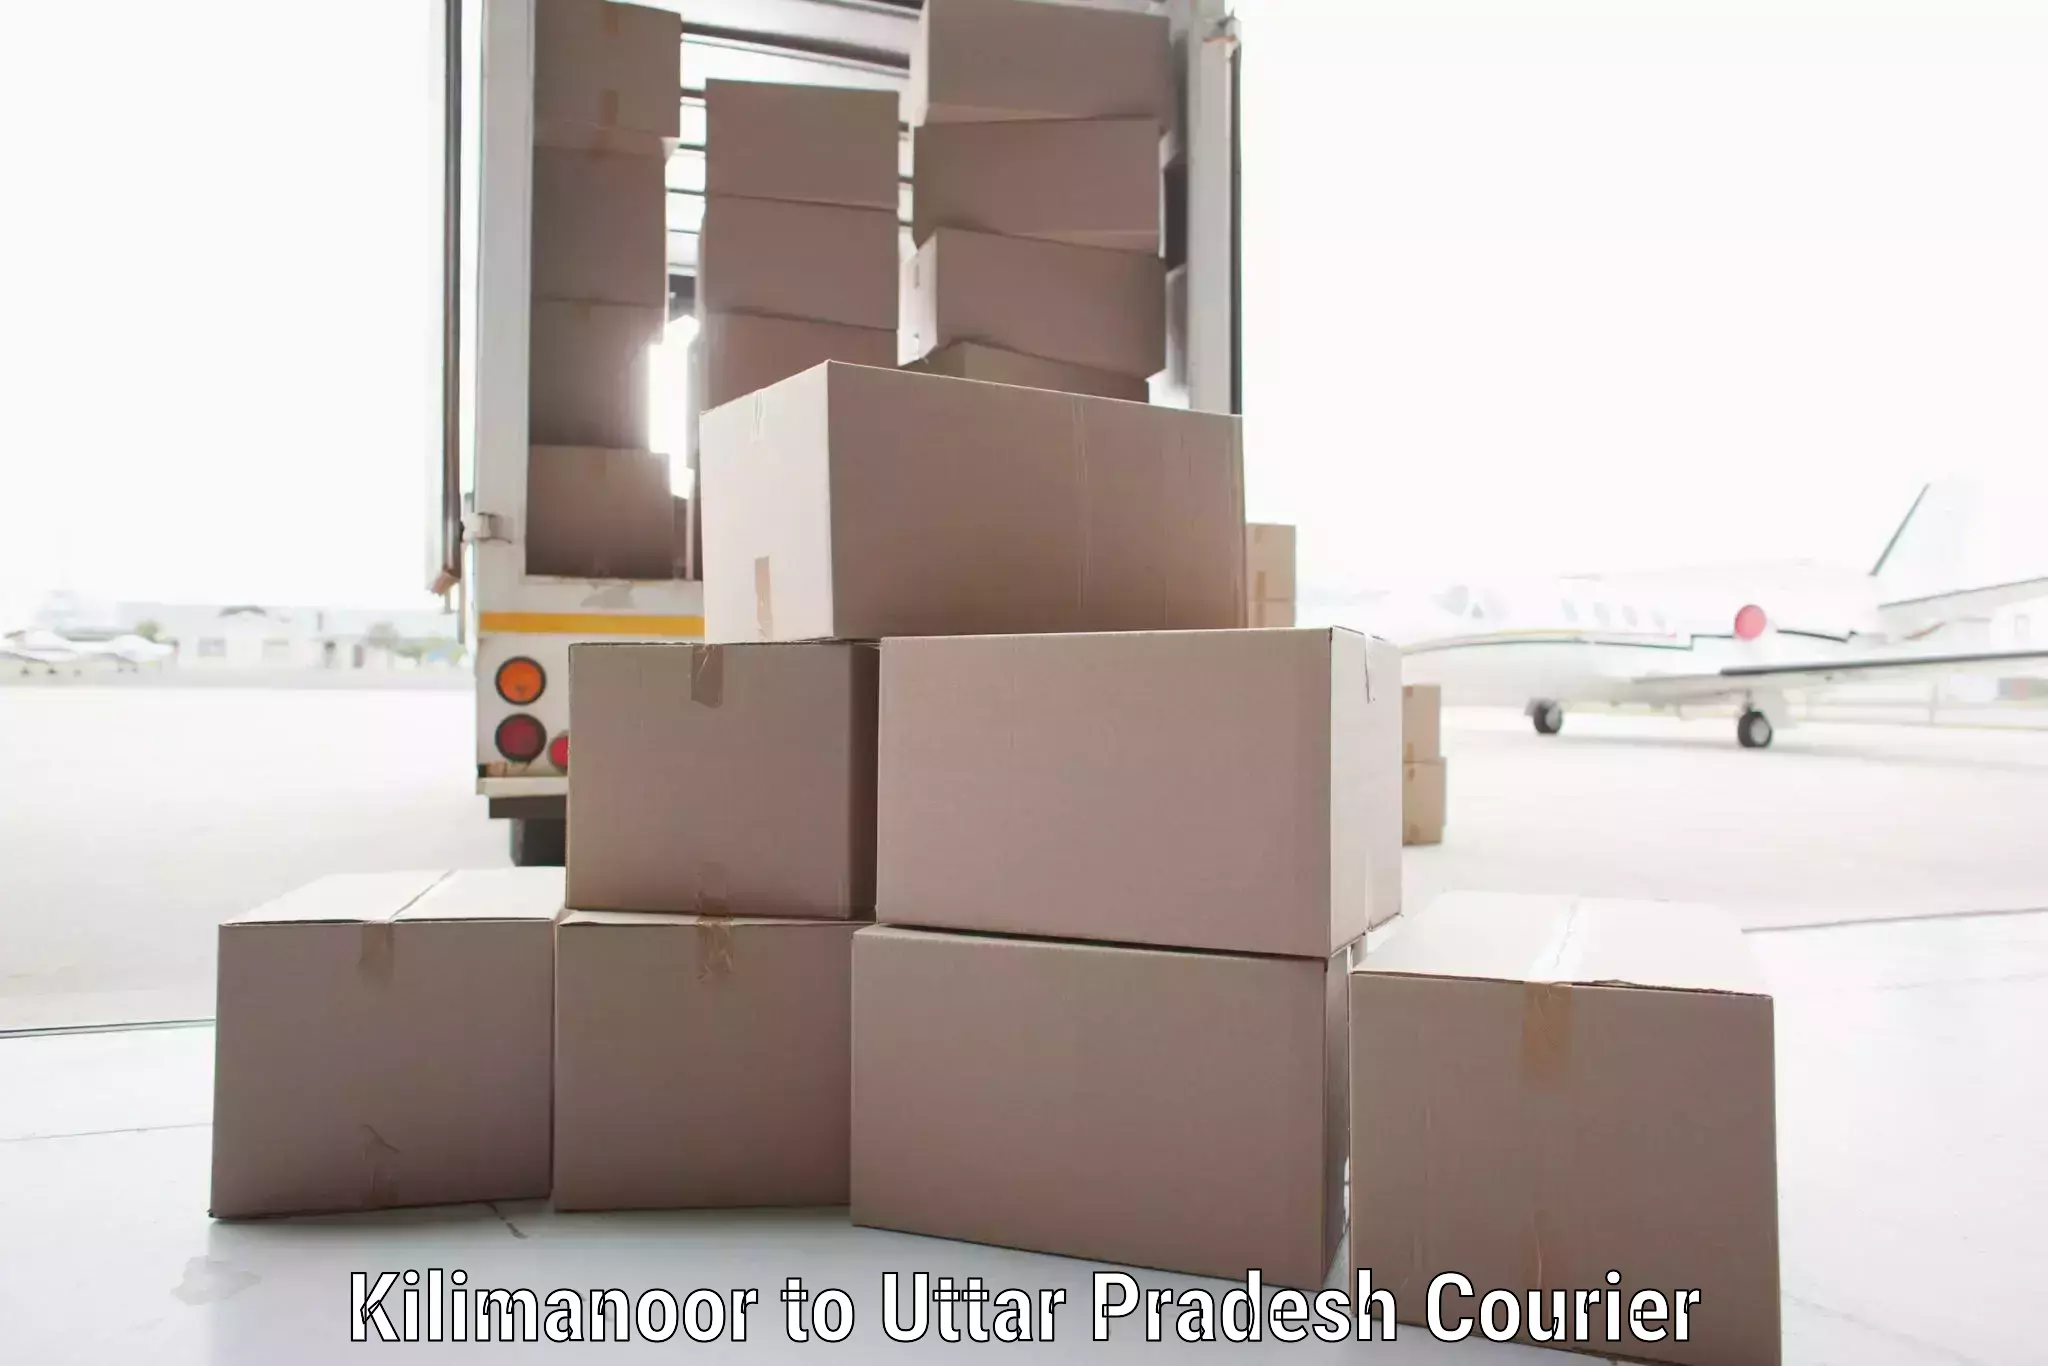 High-capacity shipping options in Kilimanoor to Dadri